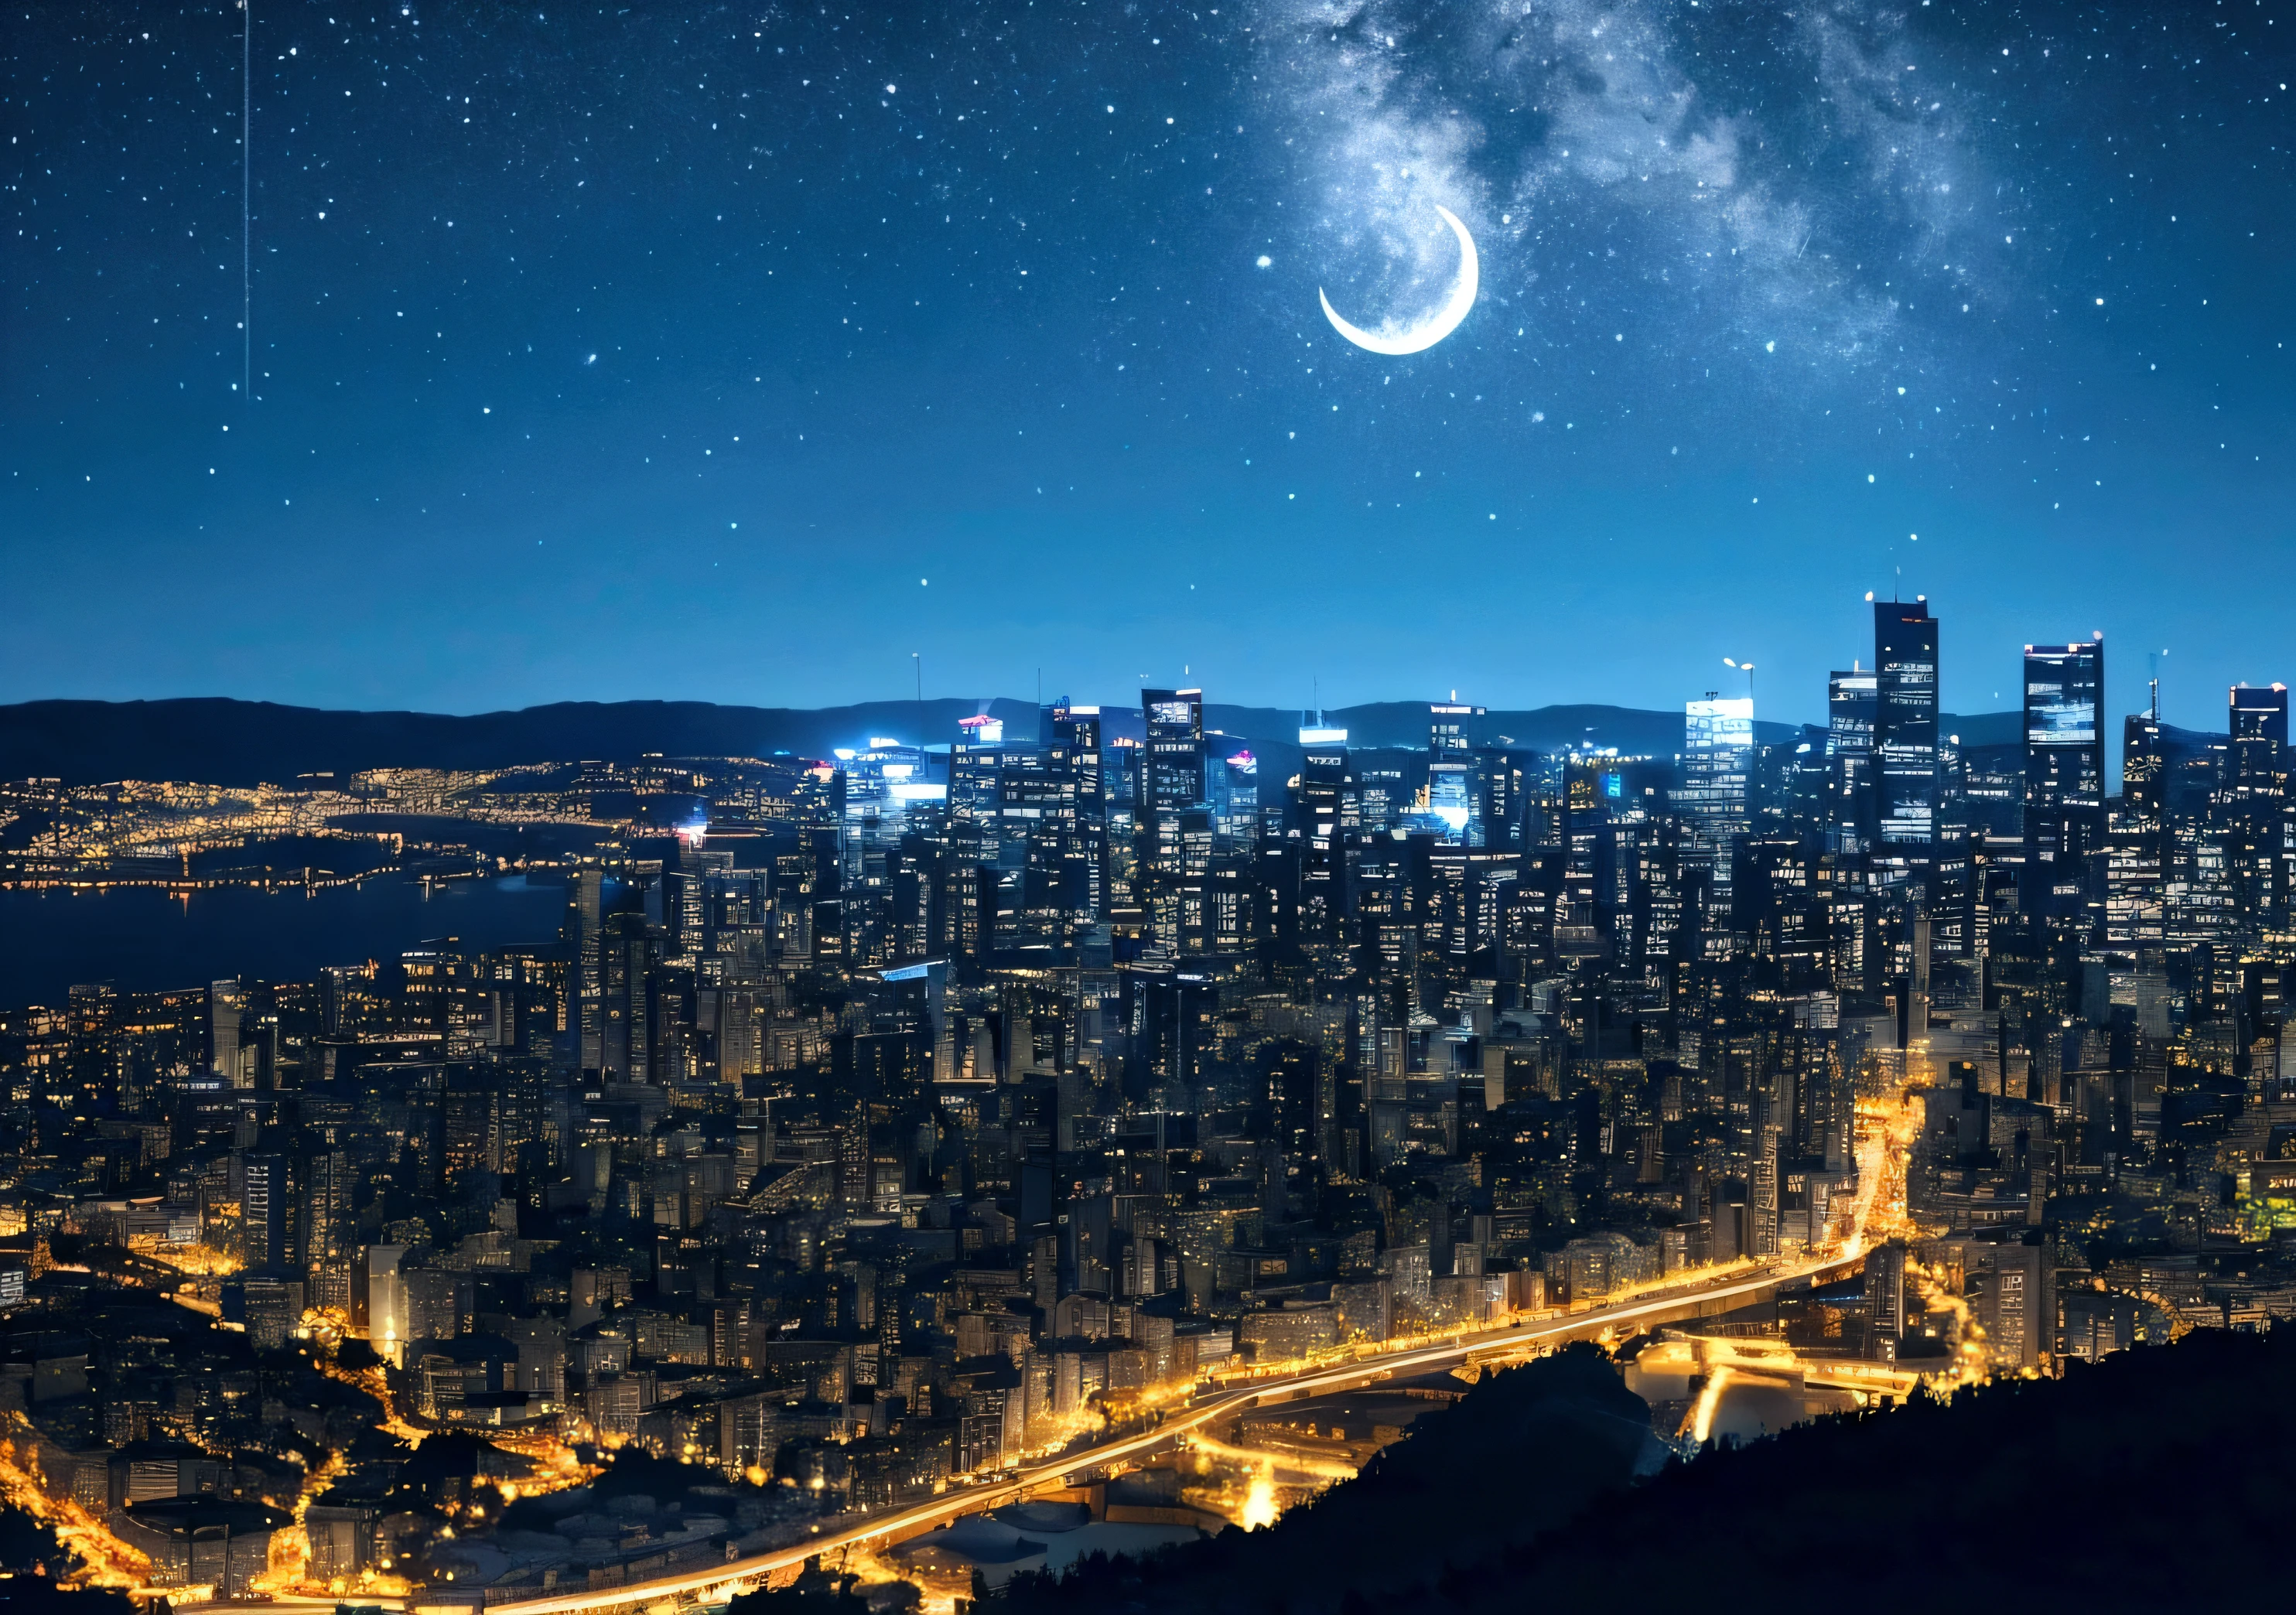 stary night, modern city with tall, bright buildings seen from the tip of a high mountain , waning quarter moon night, HD, detailed picture.